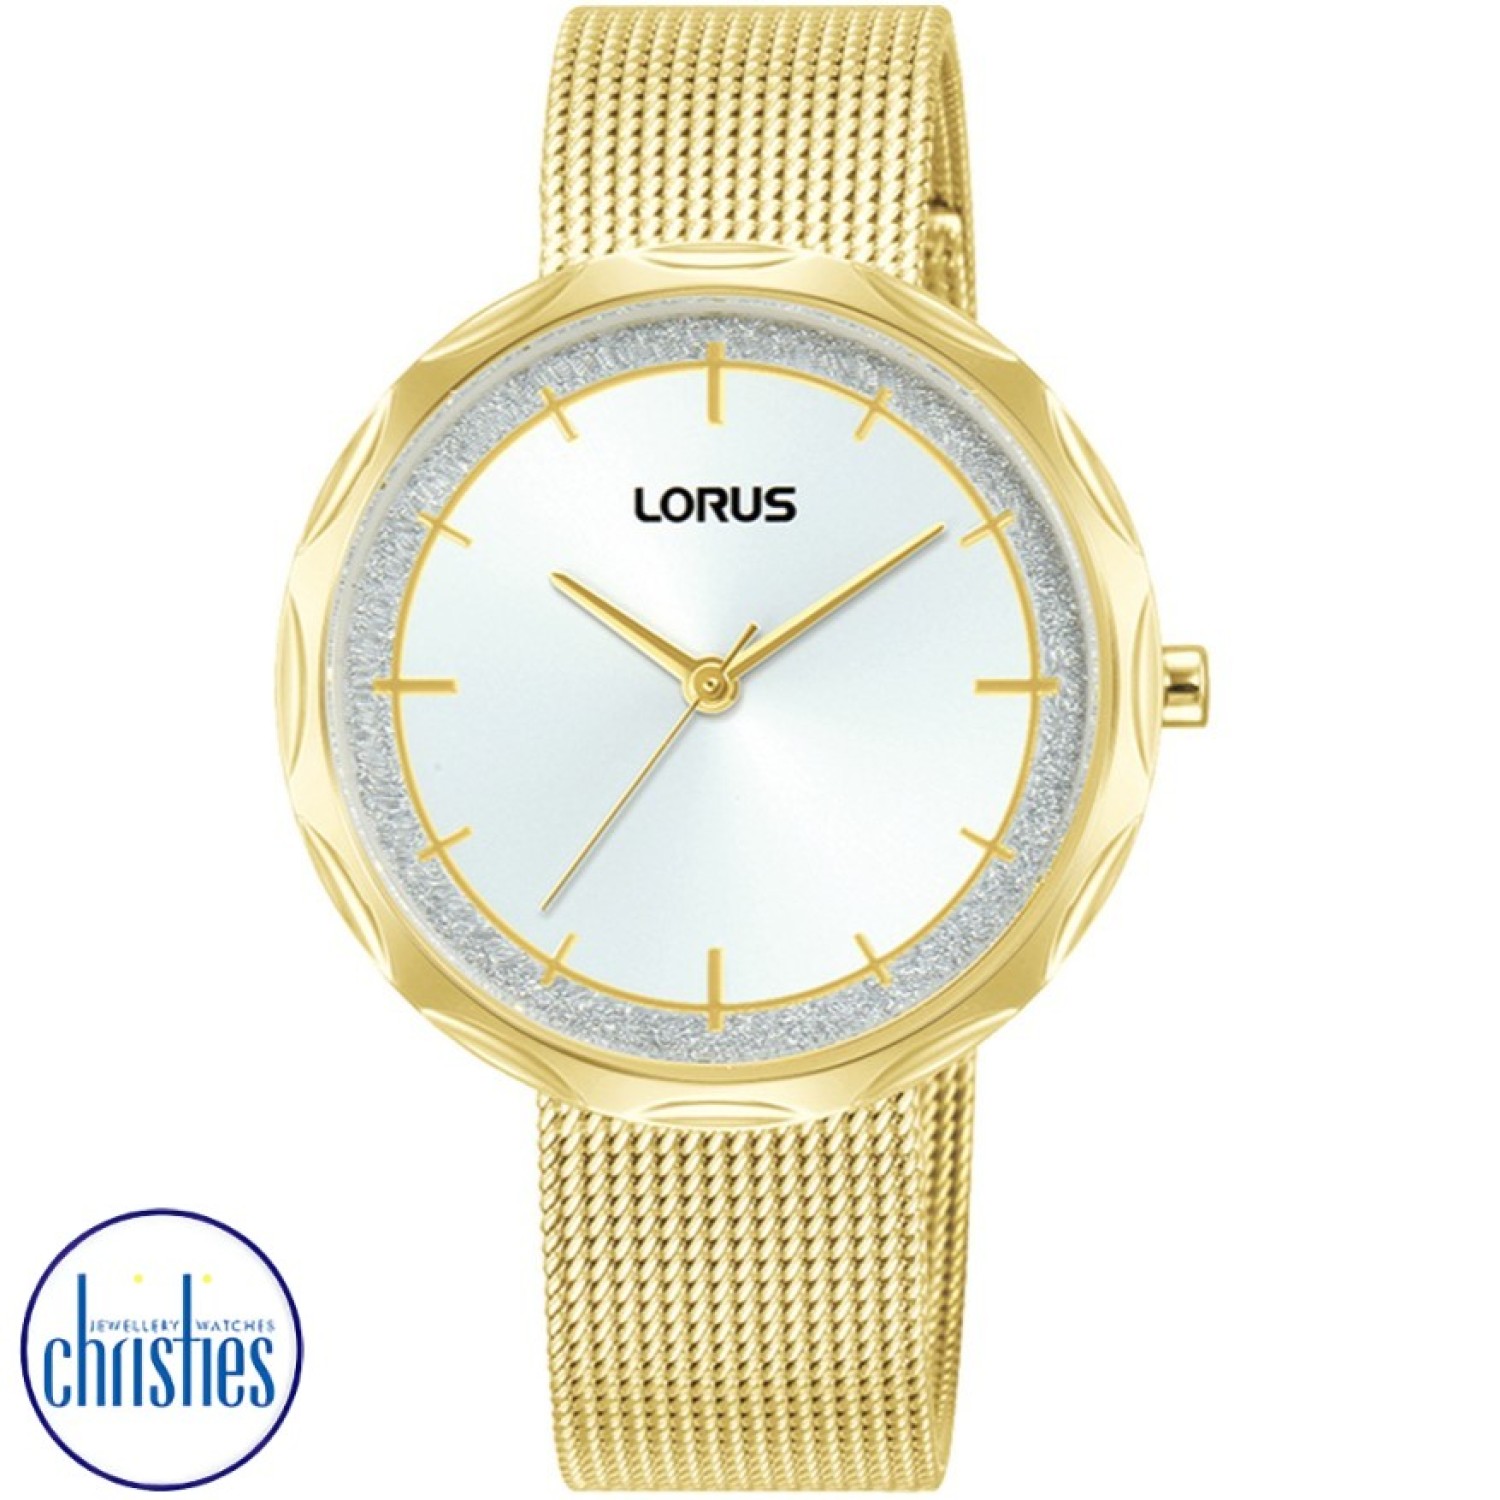 RG240WX9 Lorus Ladies Dress Analogue Watch RG240WX9 Lorus by Seiko Auckland s offers a diverse range of watch styles, including analog, digital, sports, and dress watches.